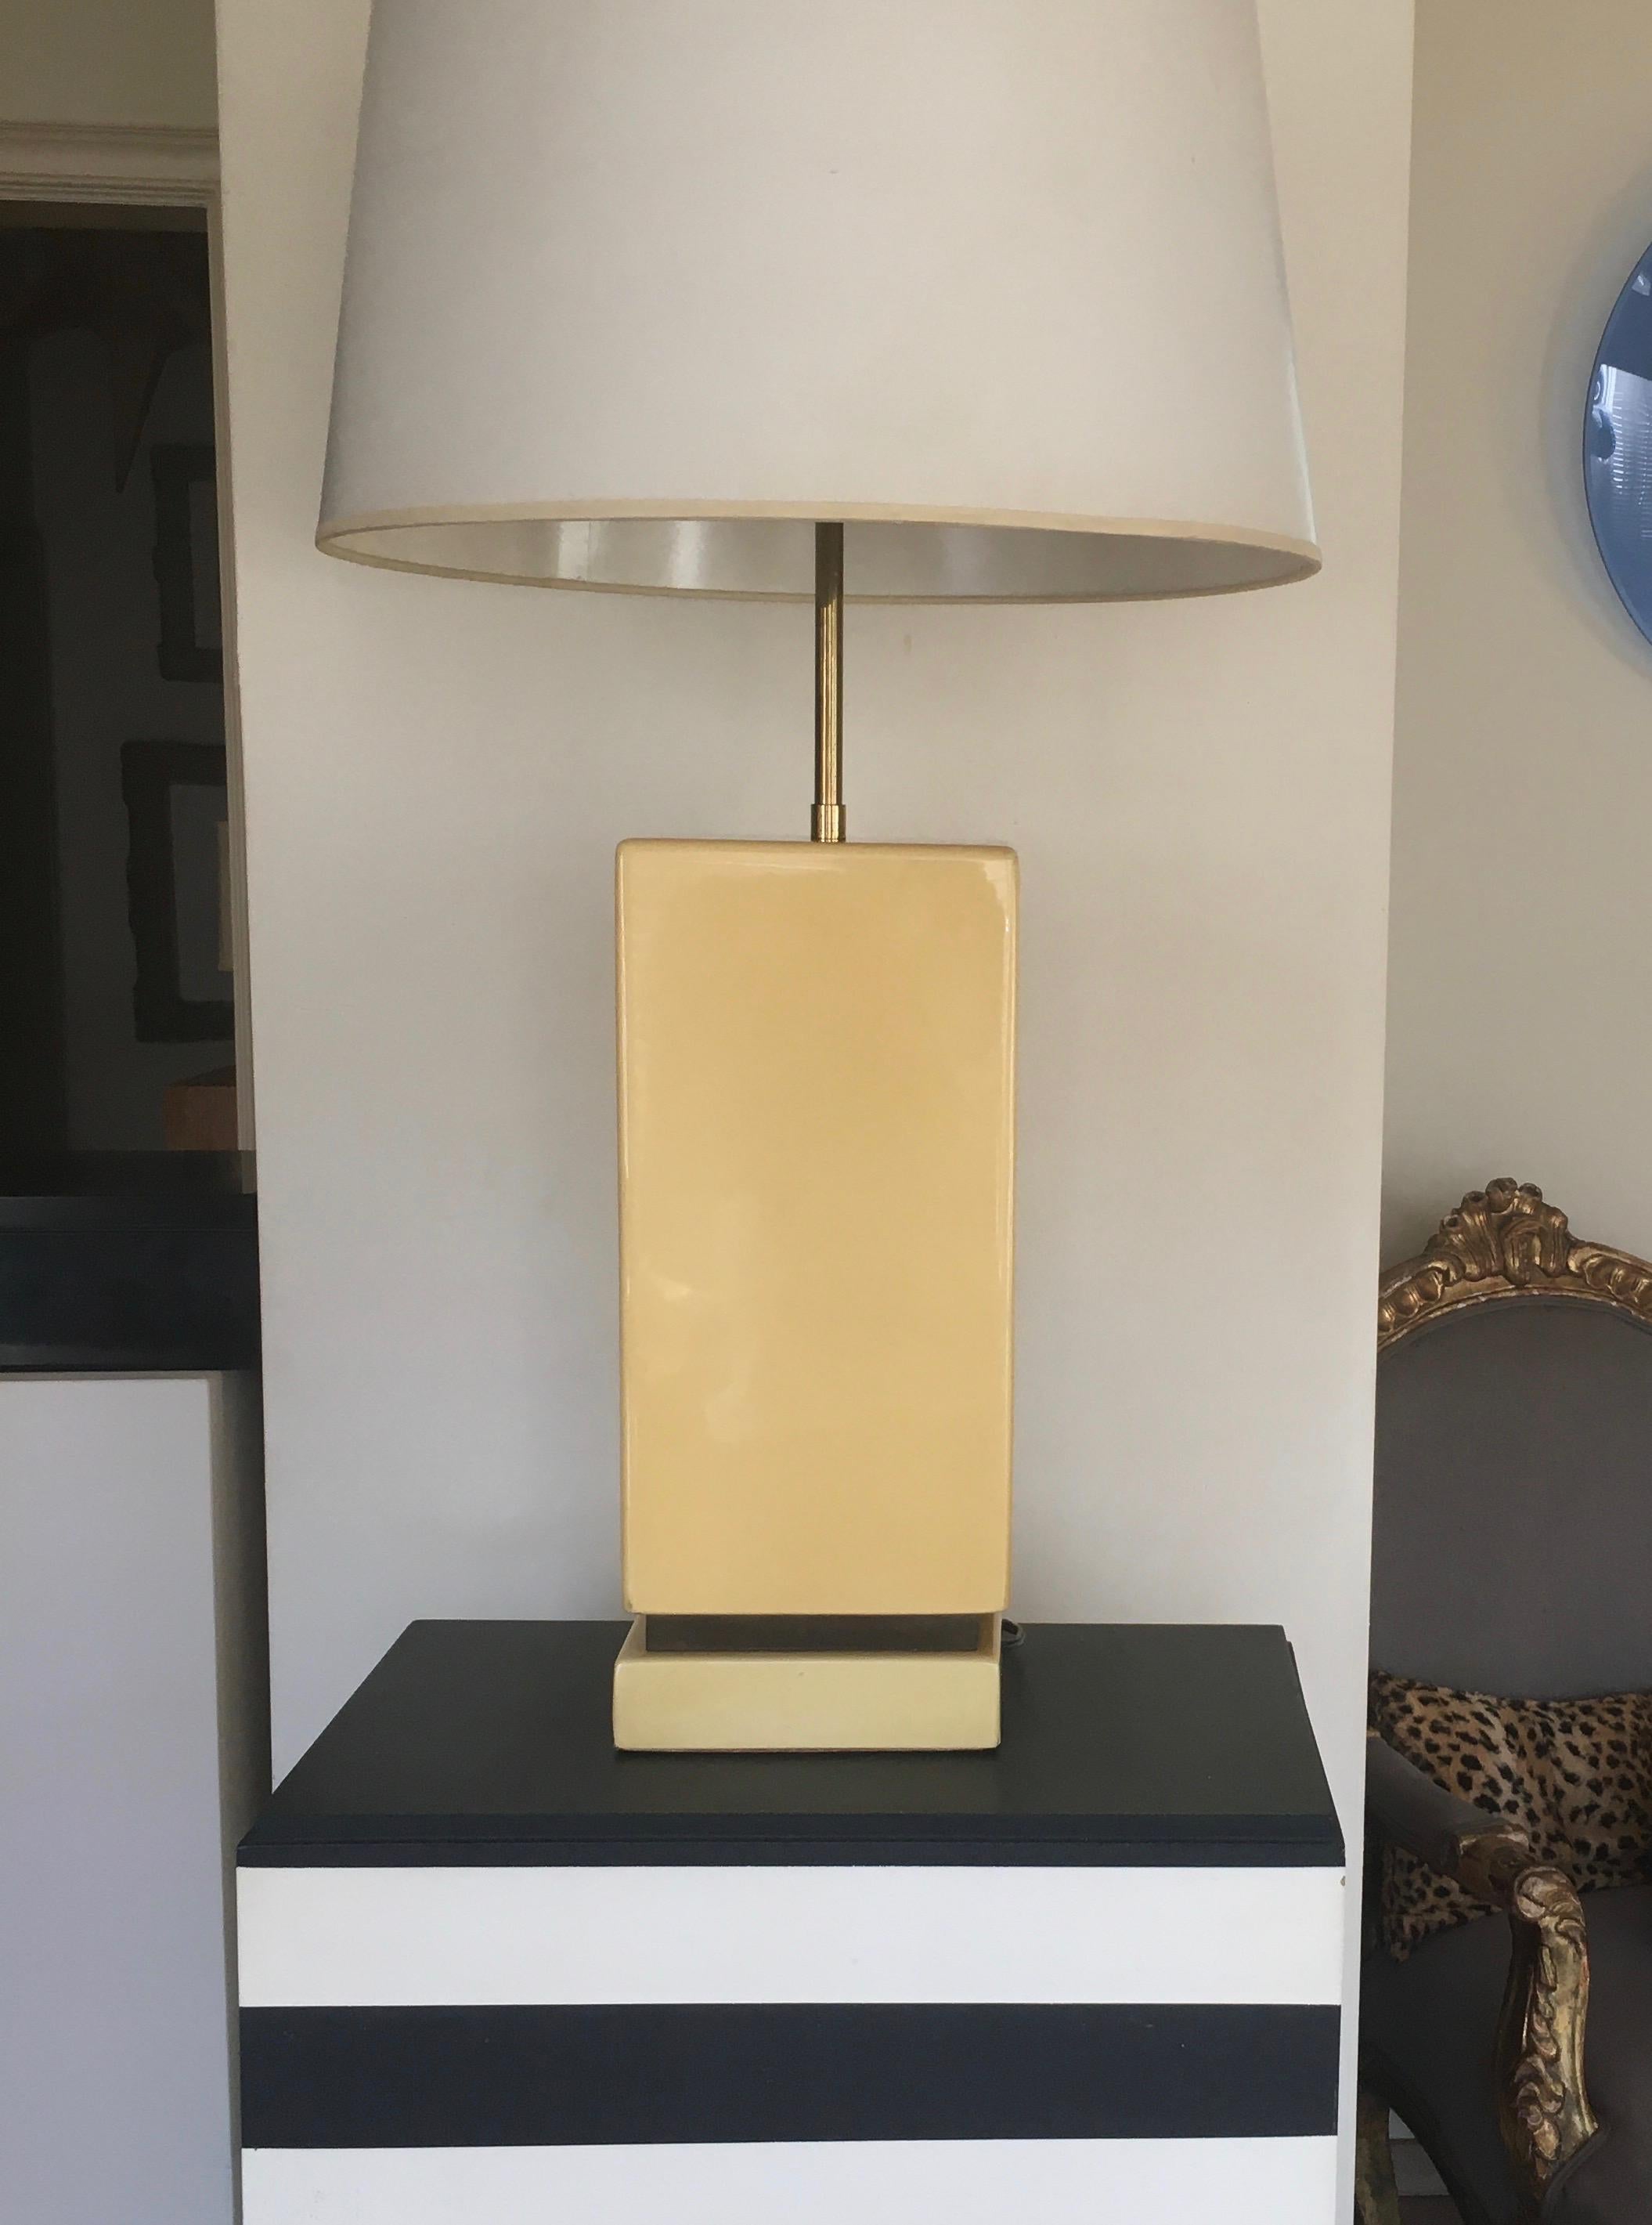 Varnished big lamp with brass details, adjustable with two lights.
By Aldo Tura around 1975.
Unsigned.